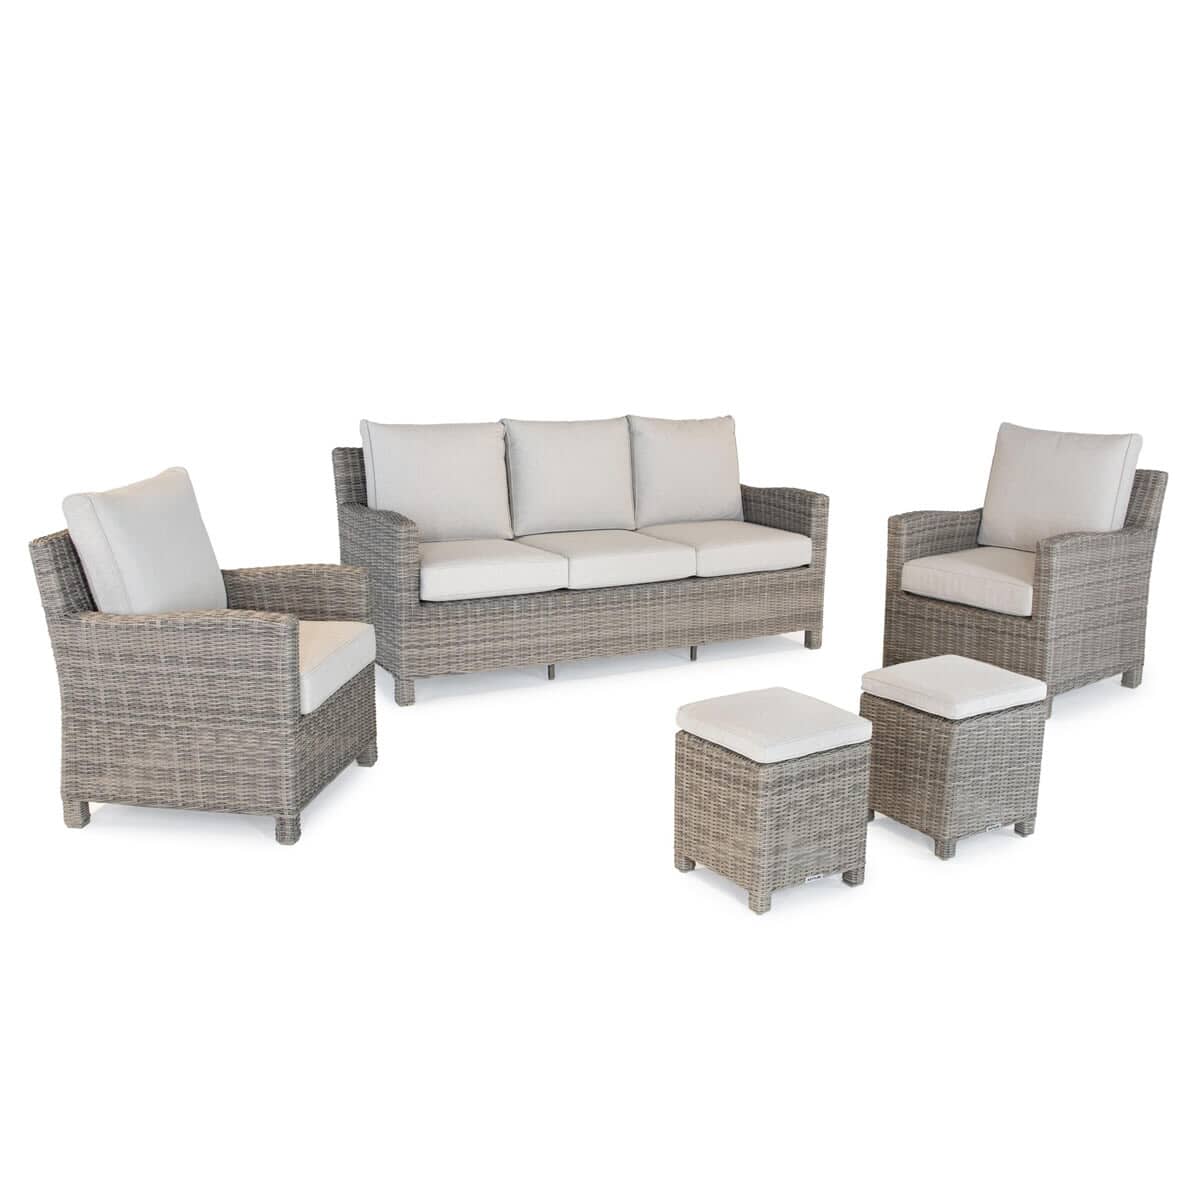 Kettler Palma Signature 3 Seat Sofa Set Oyster without Table